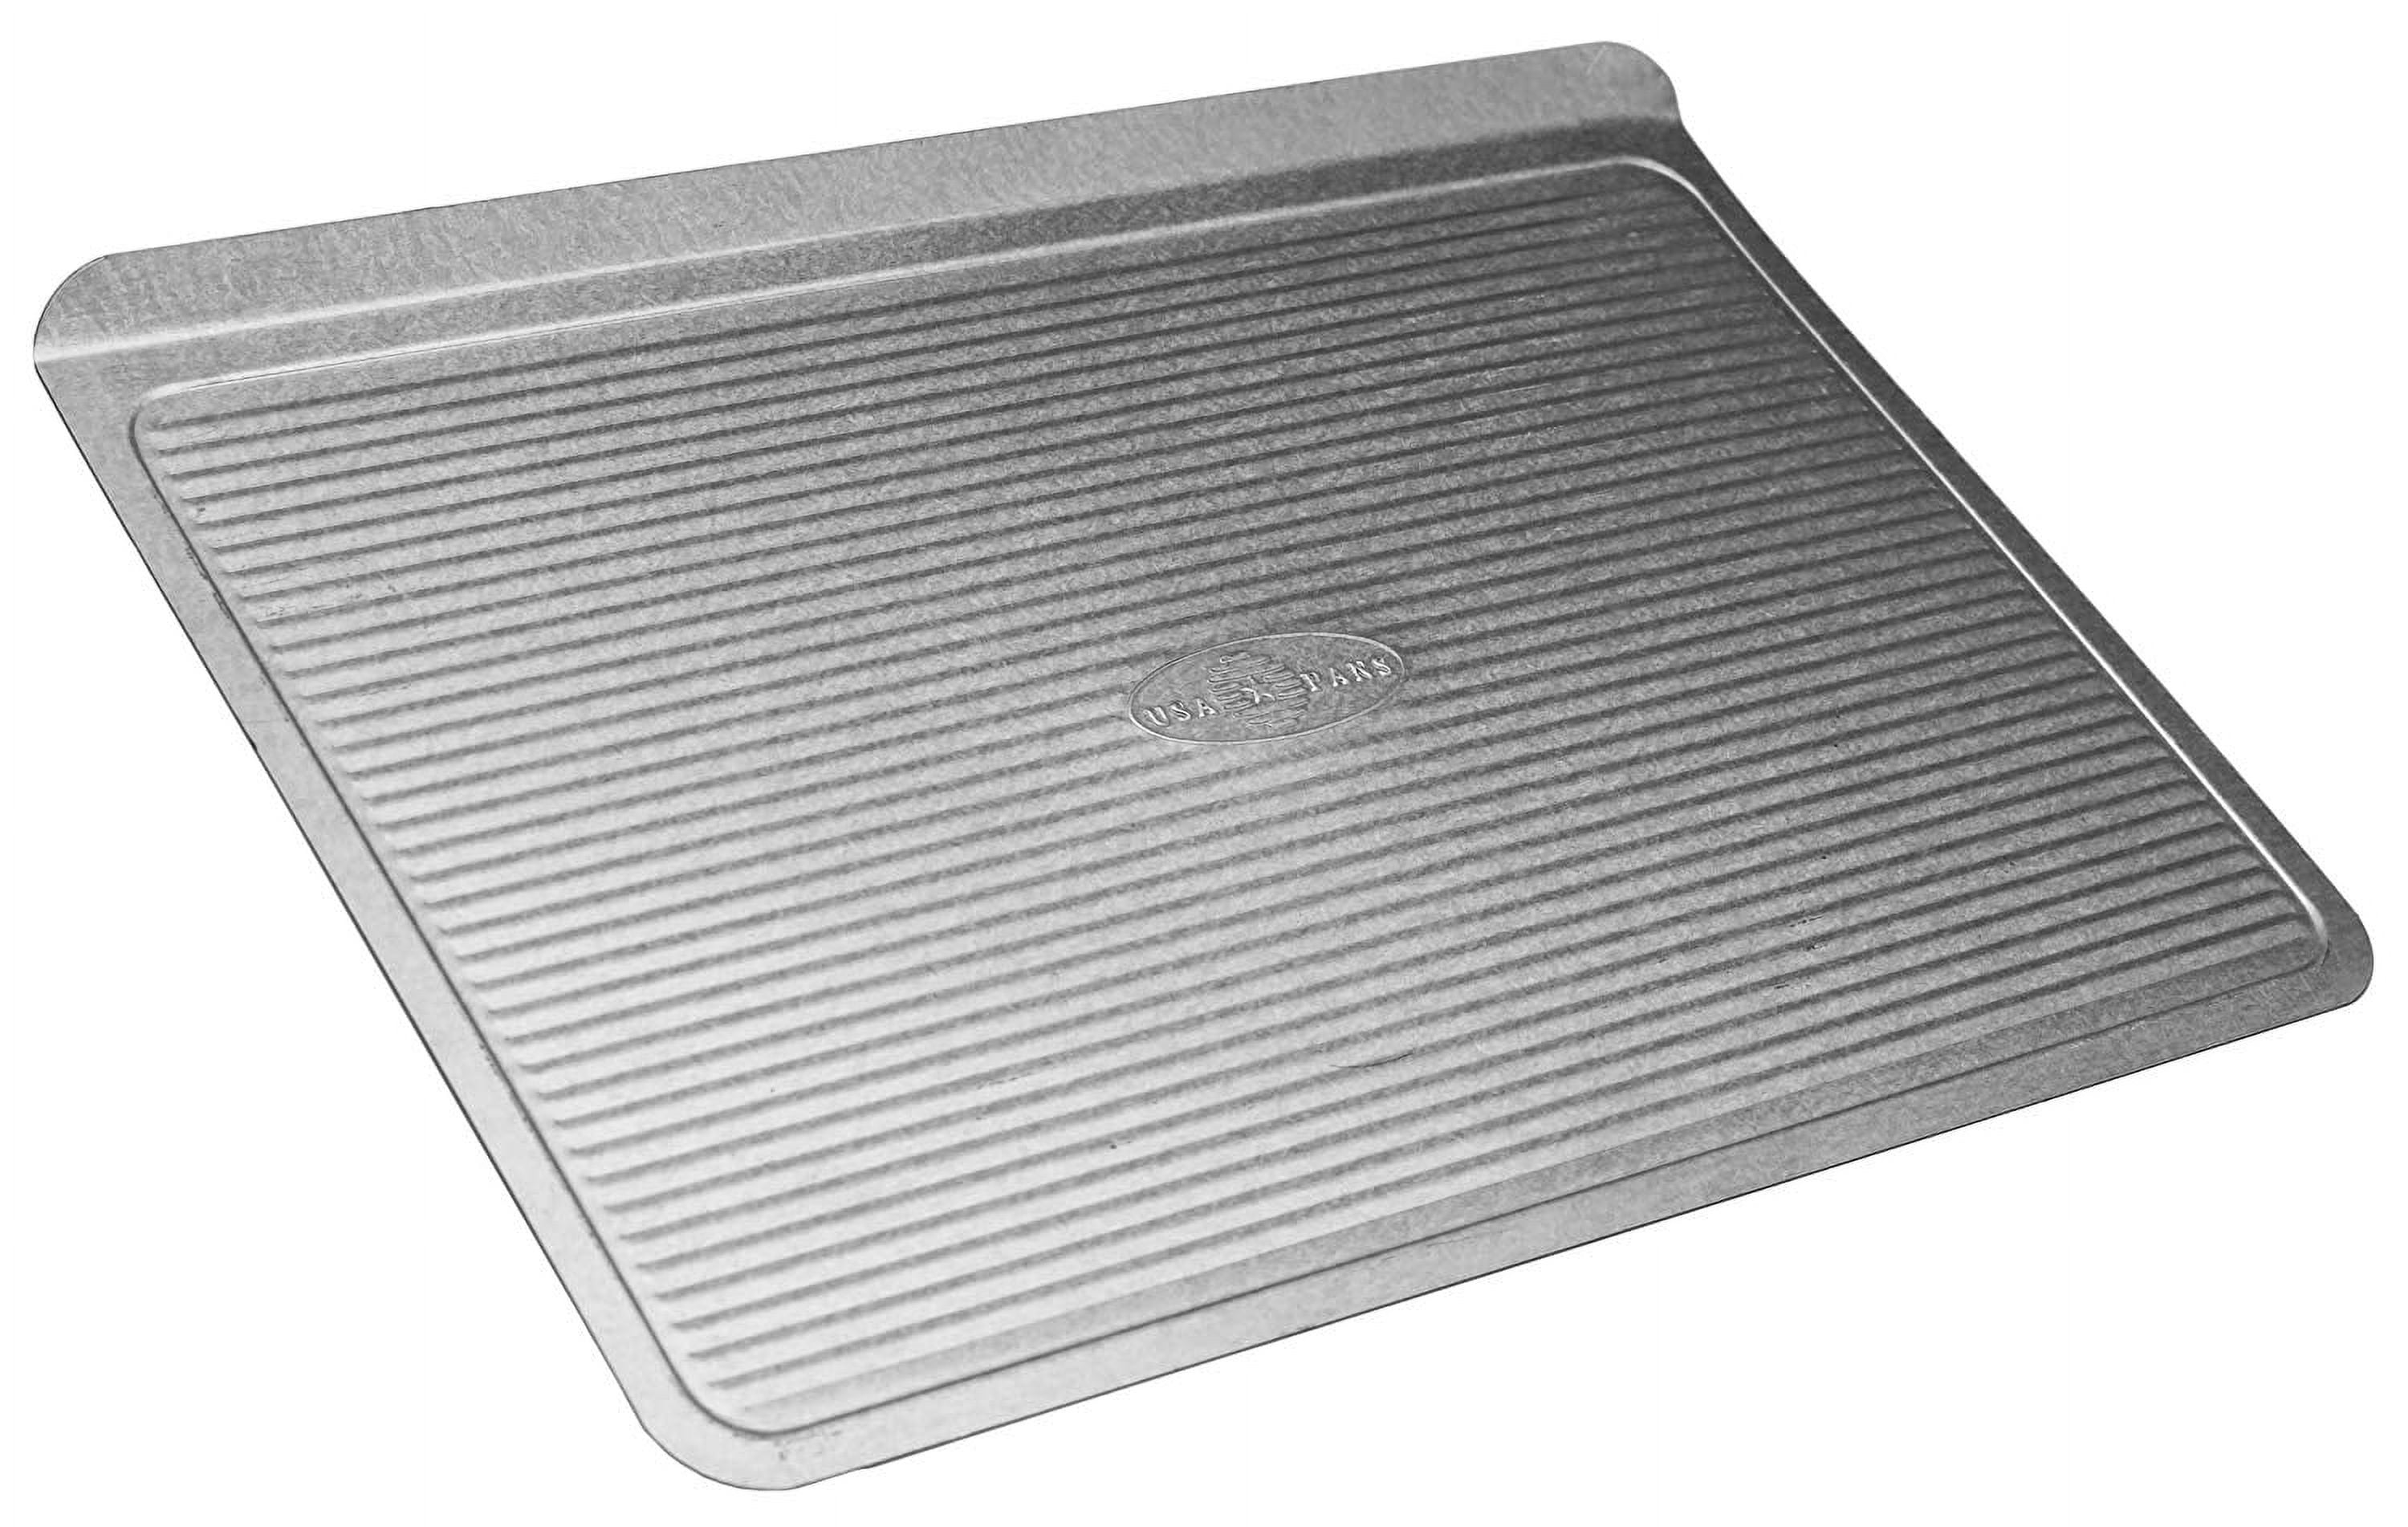 17 X 12.25 In. Cookie & Jelly Roll Pan - Pack Of 6